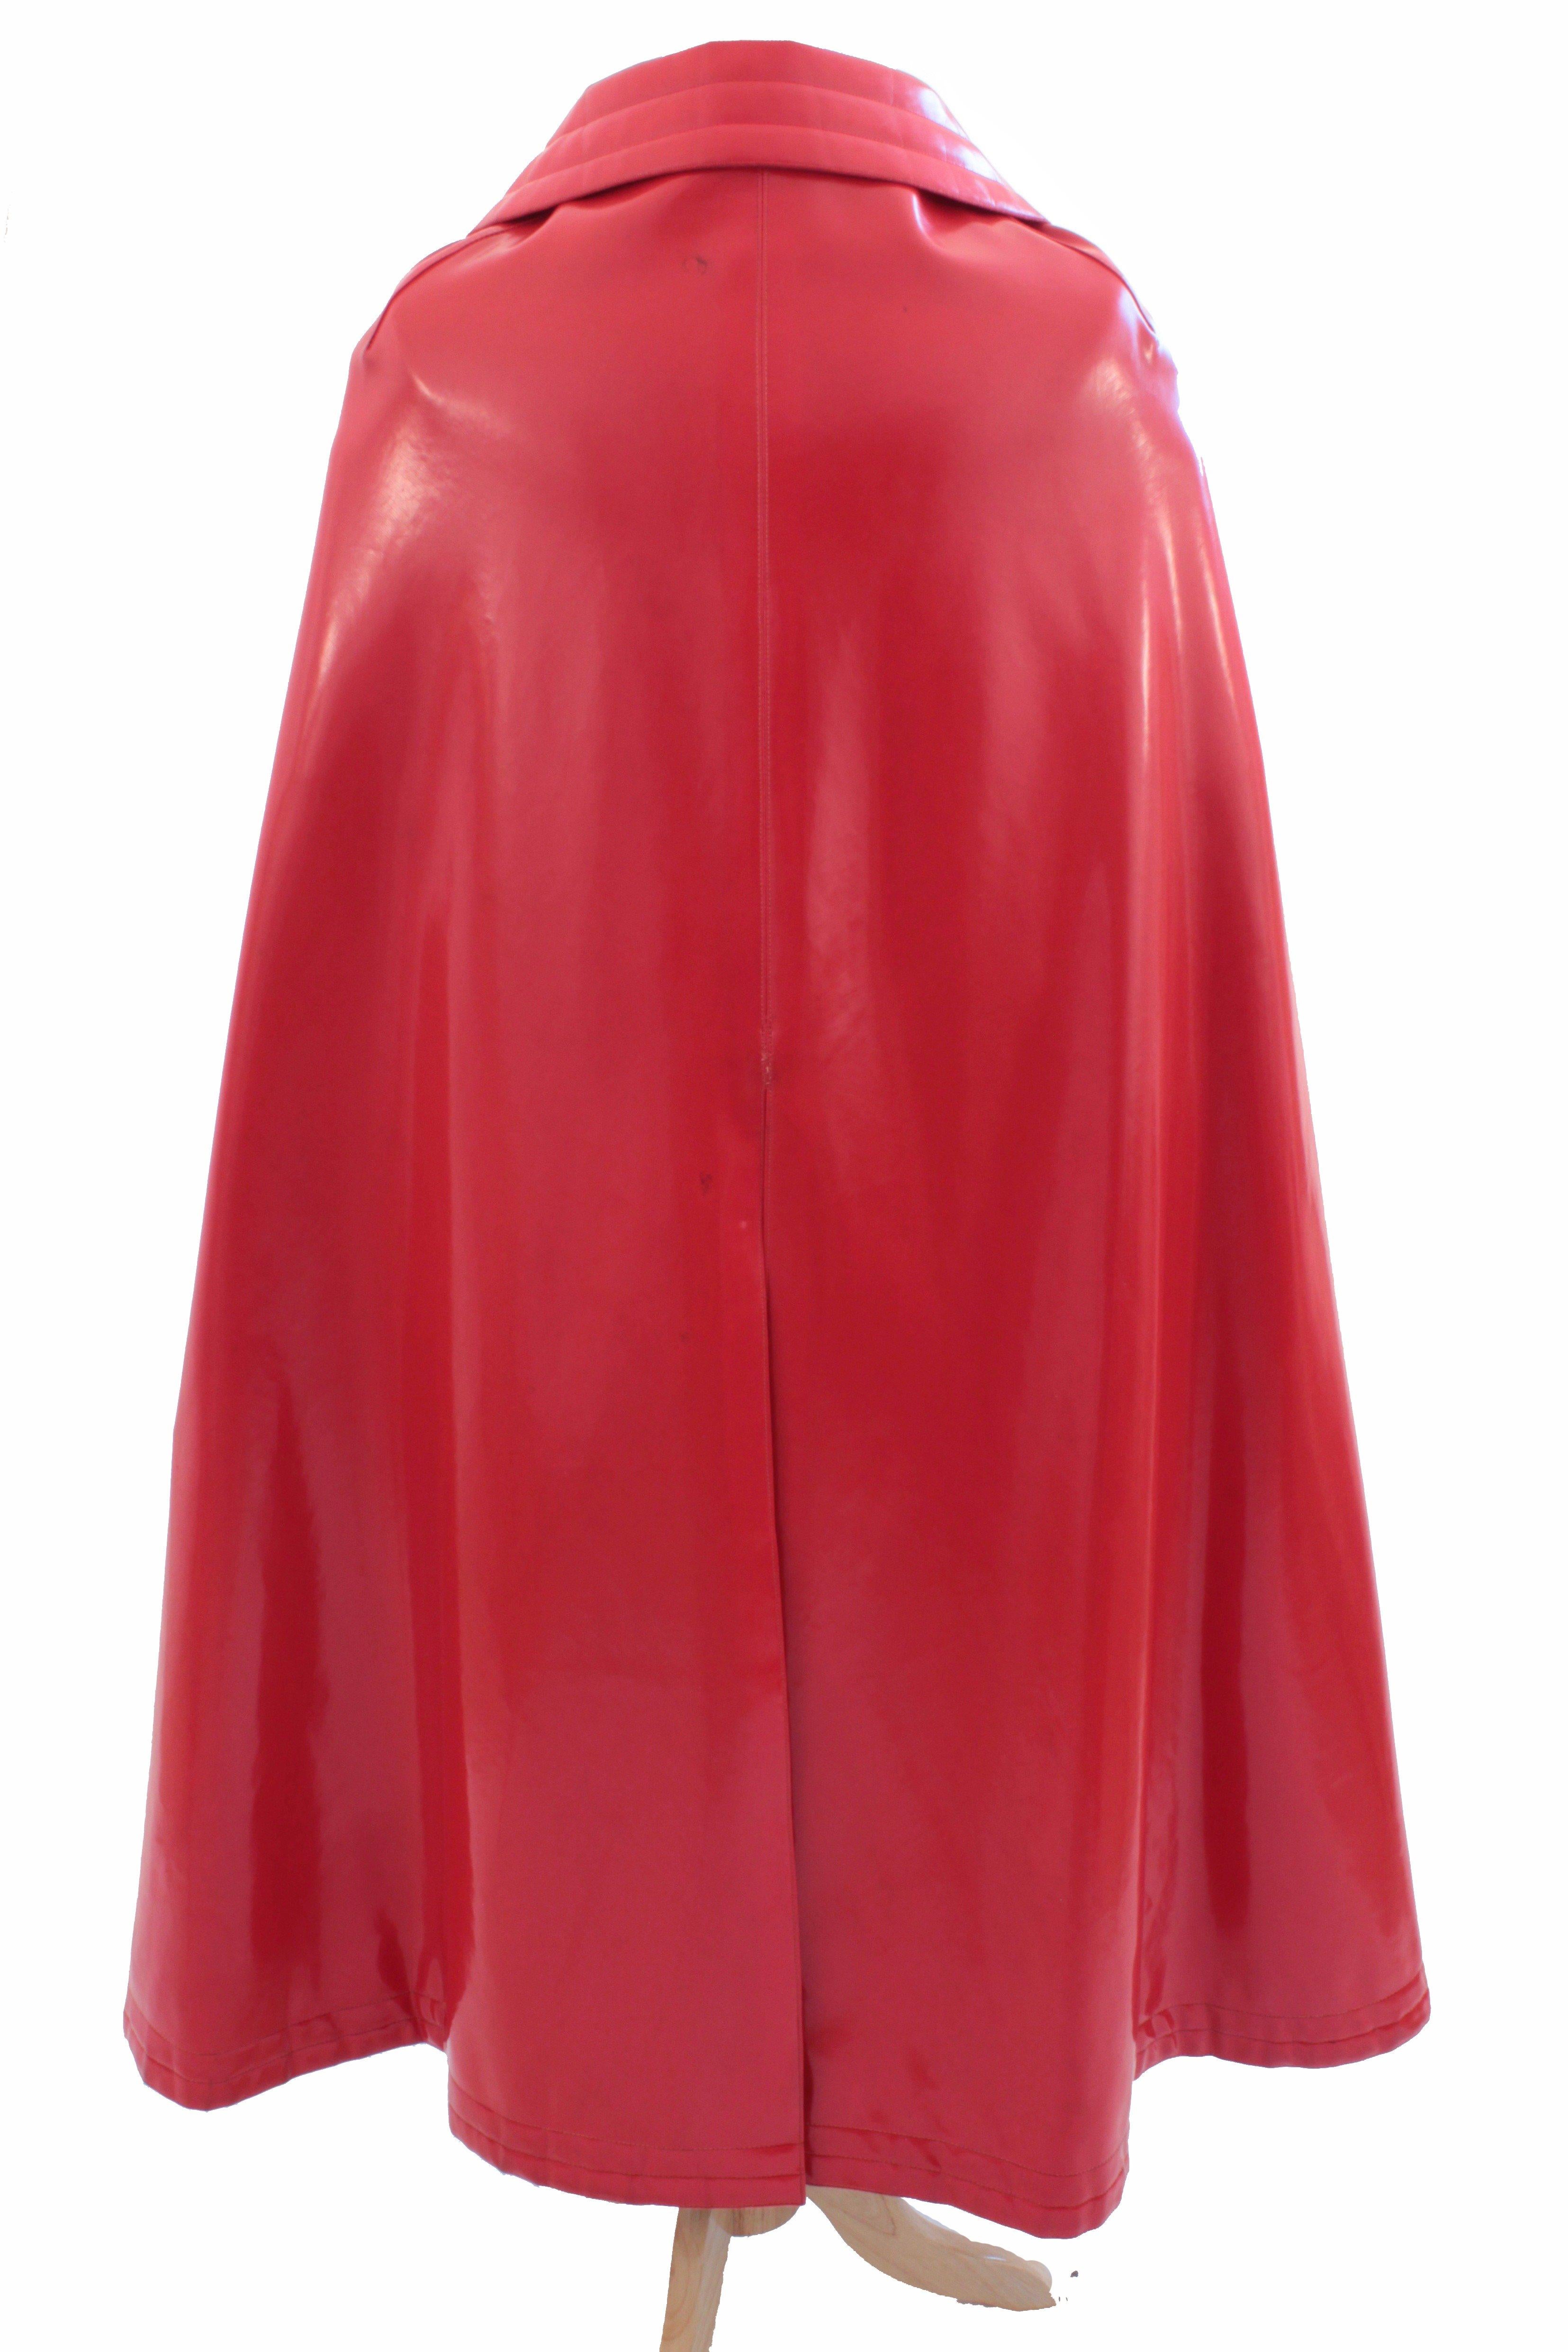 Pierre Cardin Space Age and Futurism Collection Red Vinyl Cape, 1960s  In Good Condition In Port Saint Lucie, FL